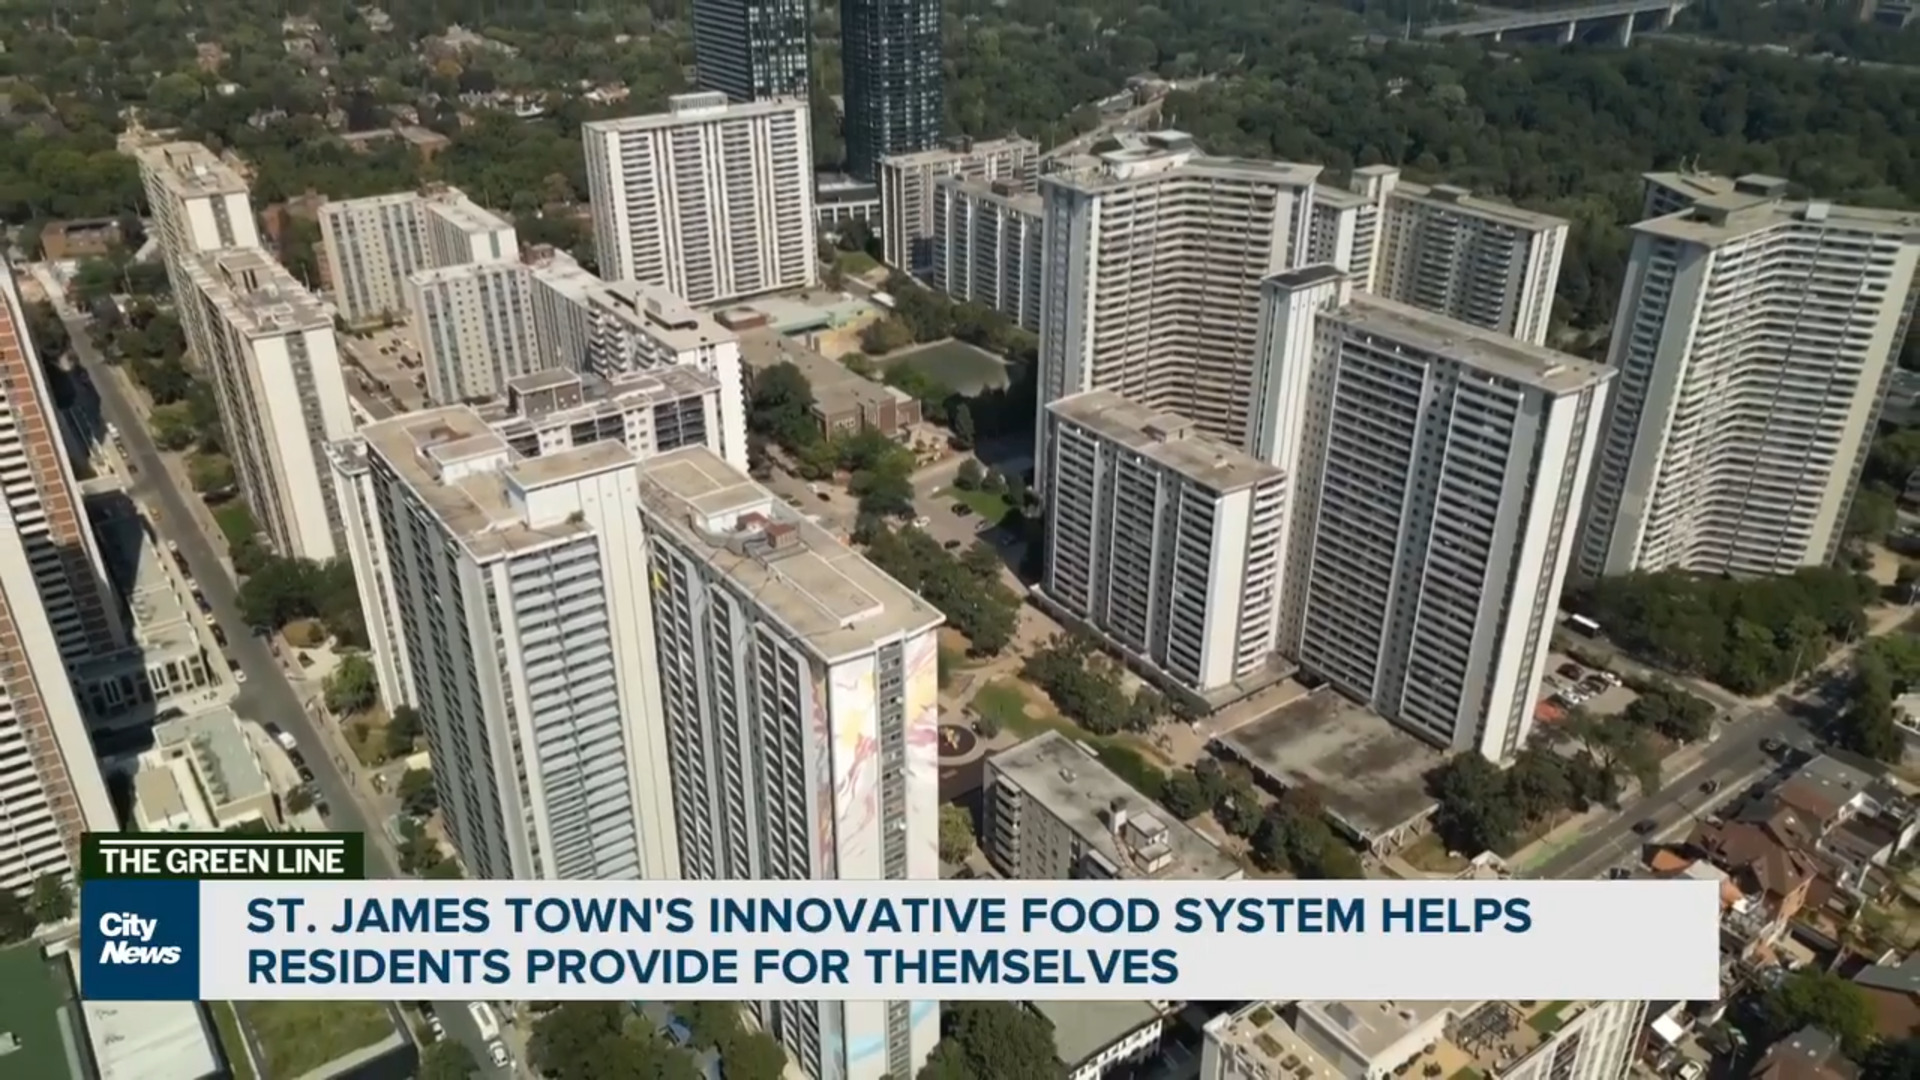 St. James Town's innovative food system helps residents provide for themselves